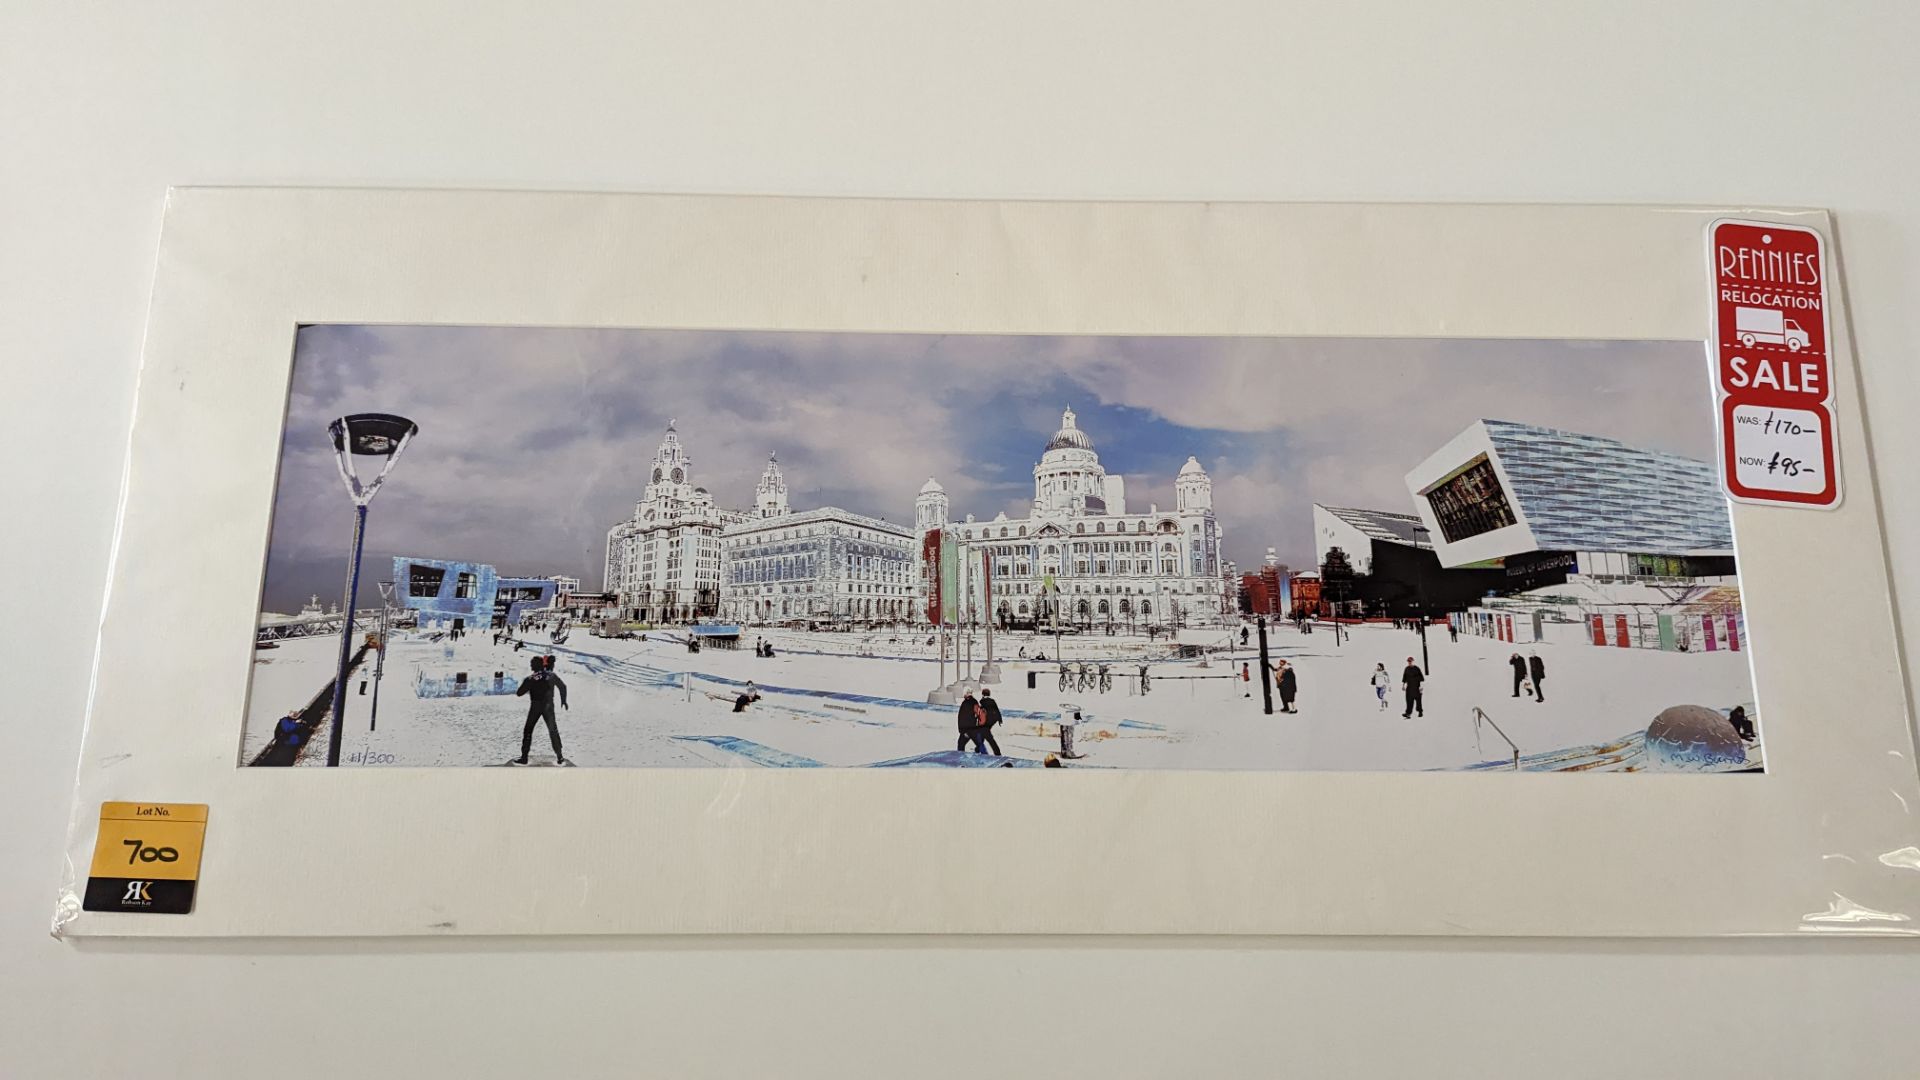 Limited edition print, no. 11/300, of Liverpool scene by M W Burns. Original selling price £170. In